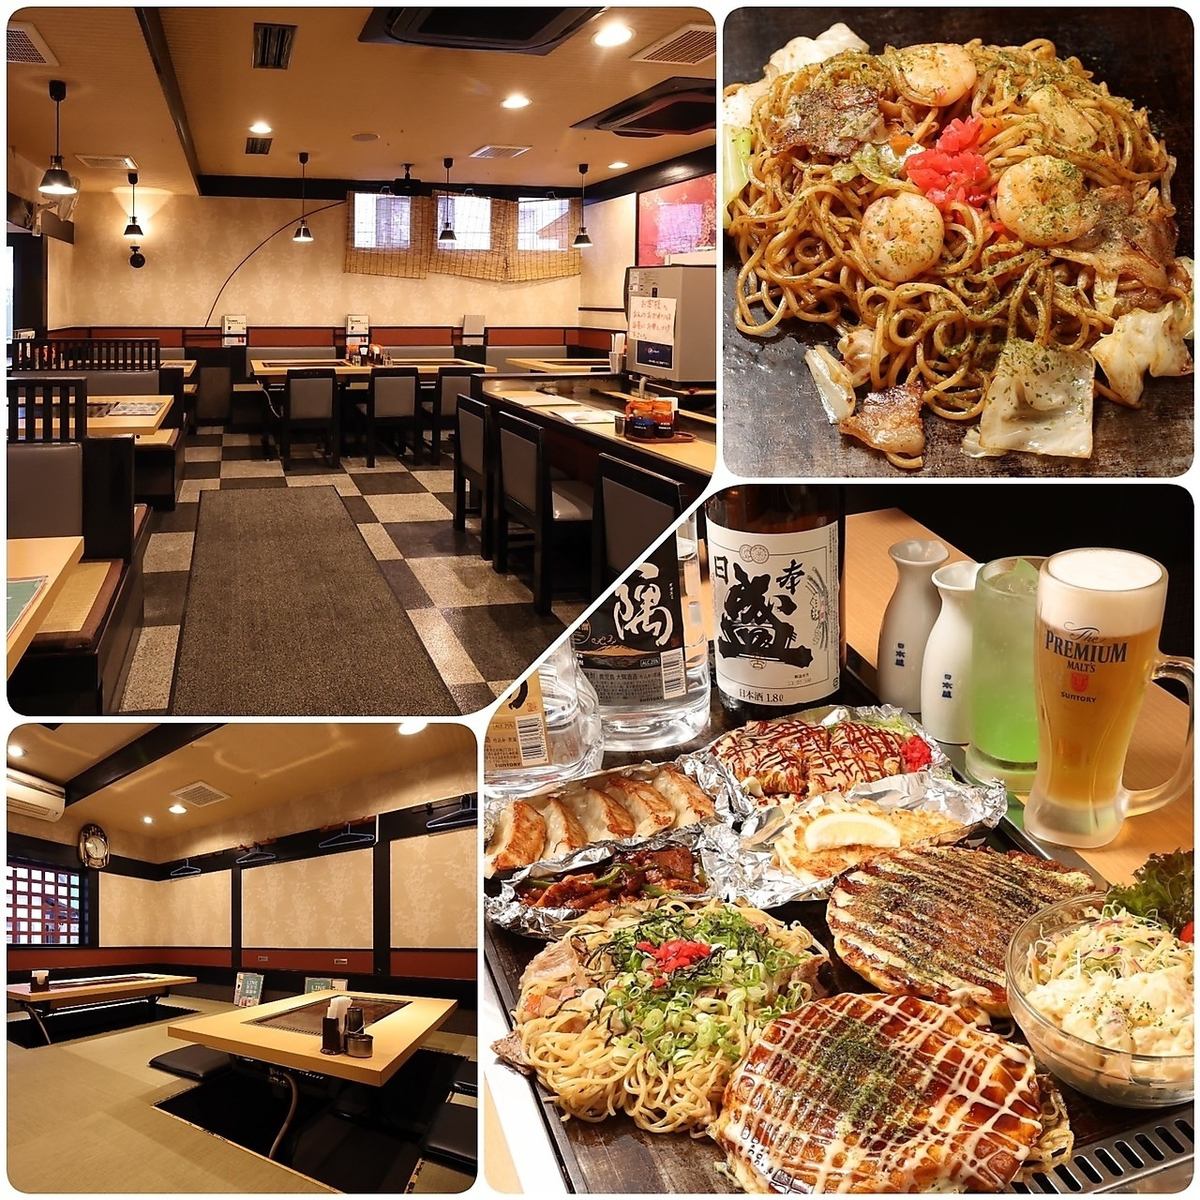 An okonomiyaki restaurant with a rich menu that you can enjoy with your family or at a party.We also have okonomiyaki shaped like fish and cars!